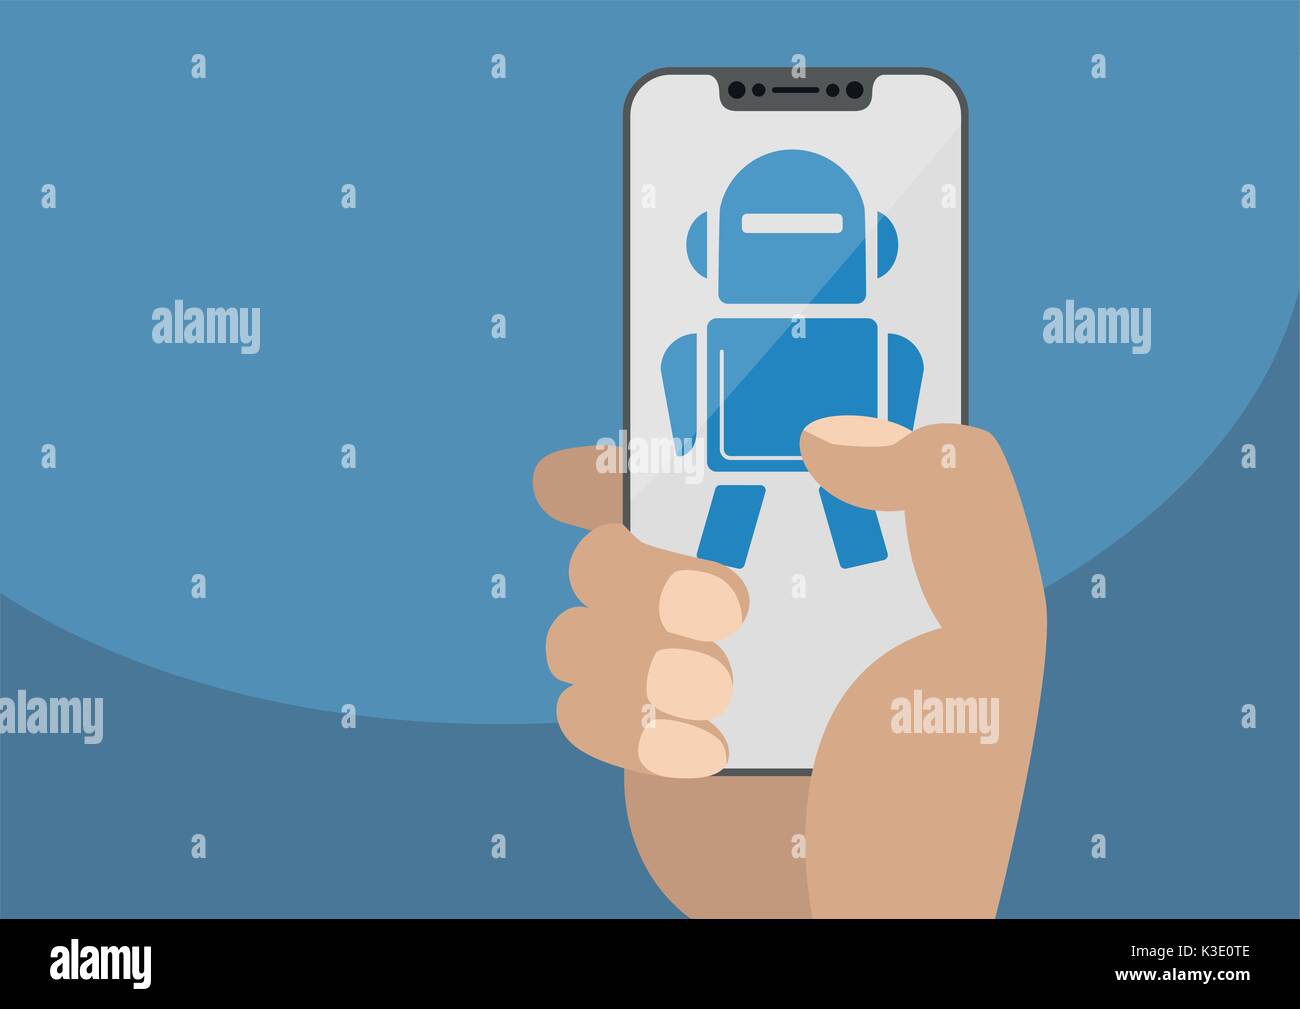 Hand holding modern bezel free smartphone. Robot icon displayed on touchscreen as concept for automation or digitalization in a mobile world. Illustra Stock Vector